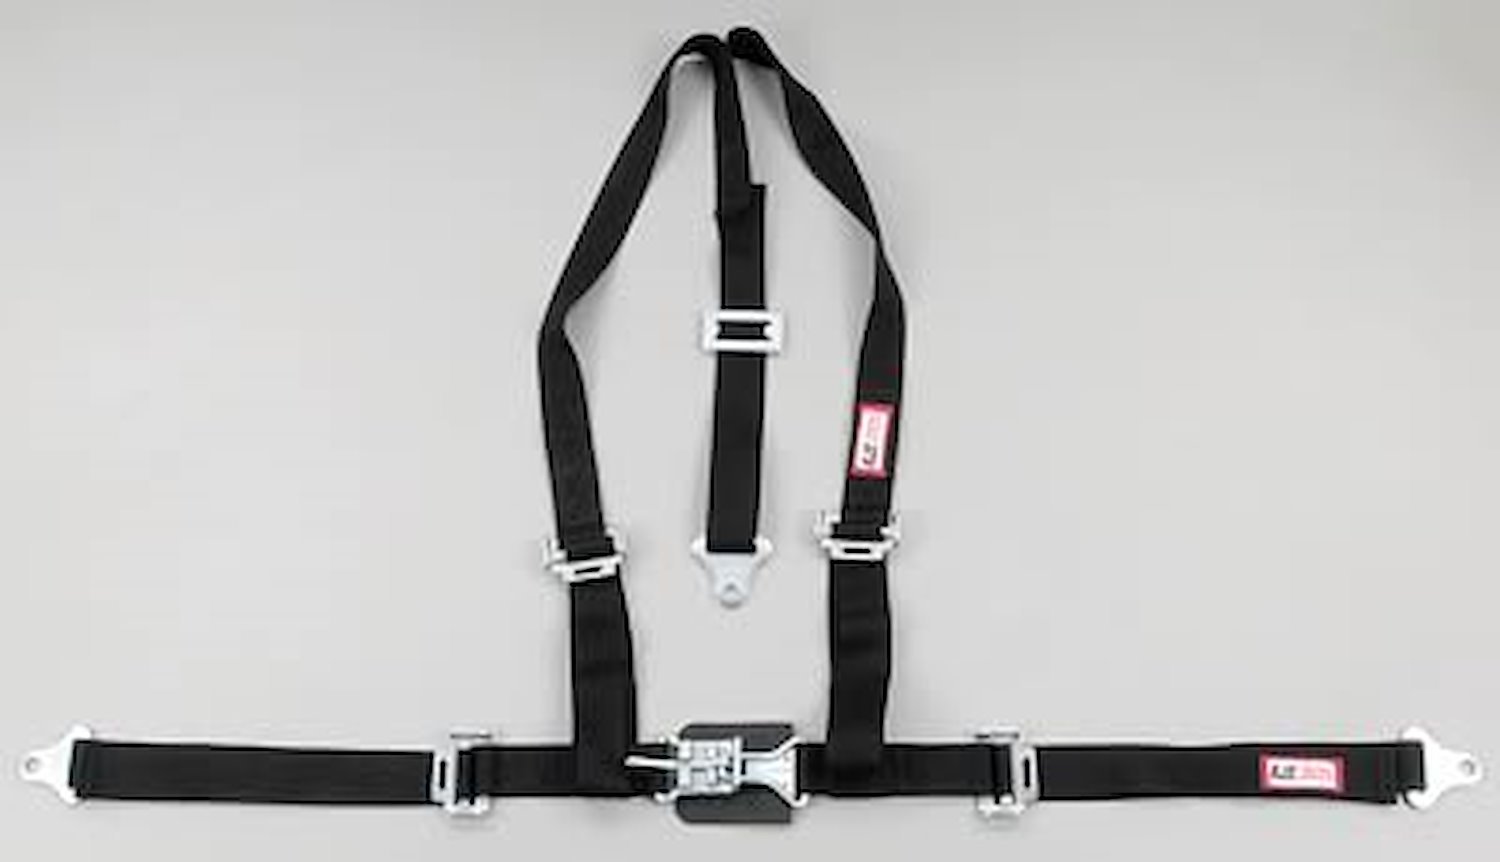 NON-SFI L&L HARNESS 2 PULL UP Lap Belt SNAP SEWN IN 2 S.H. INDIVIDUAL FLOOR Mount w/STERNUM STRAP WRAP/BOLT HOT PINK